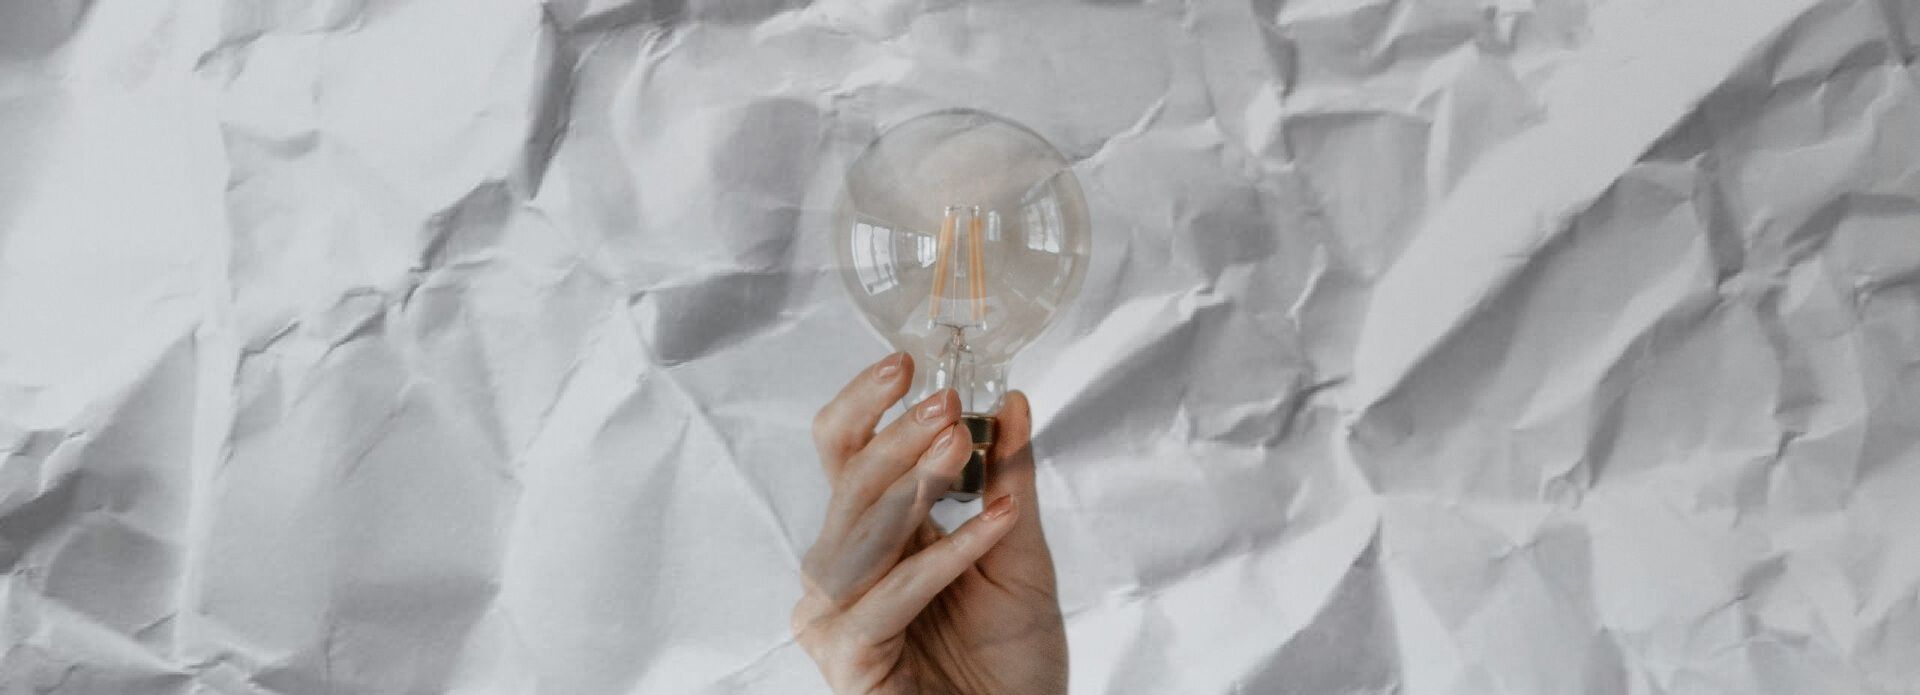 A person is holding a light bulb in their hand on a piece of crumpled paper.